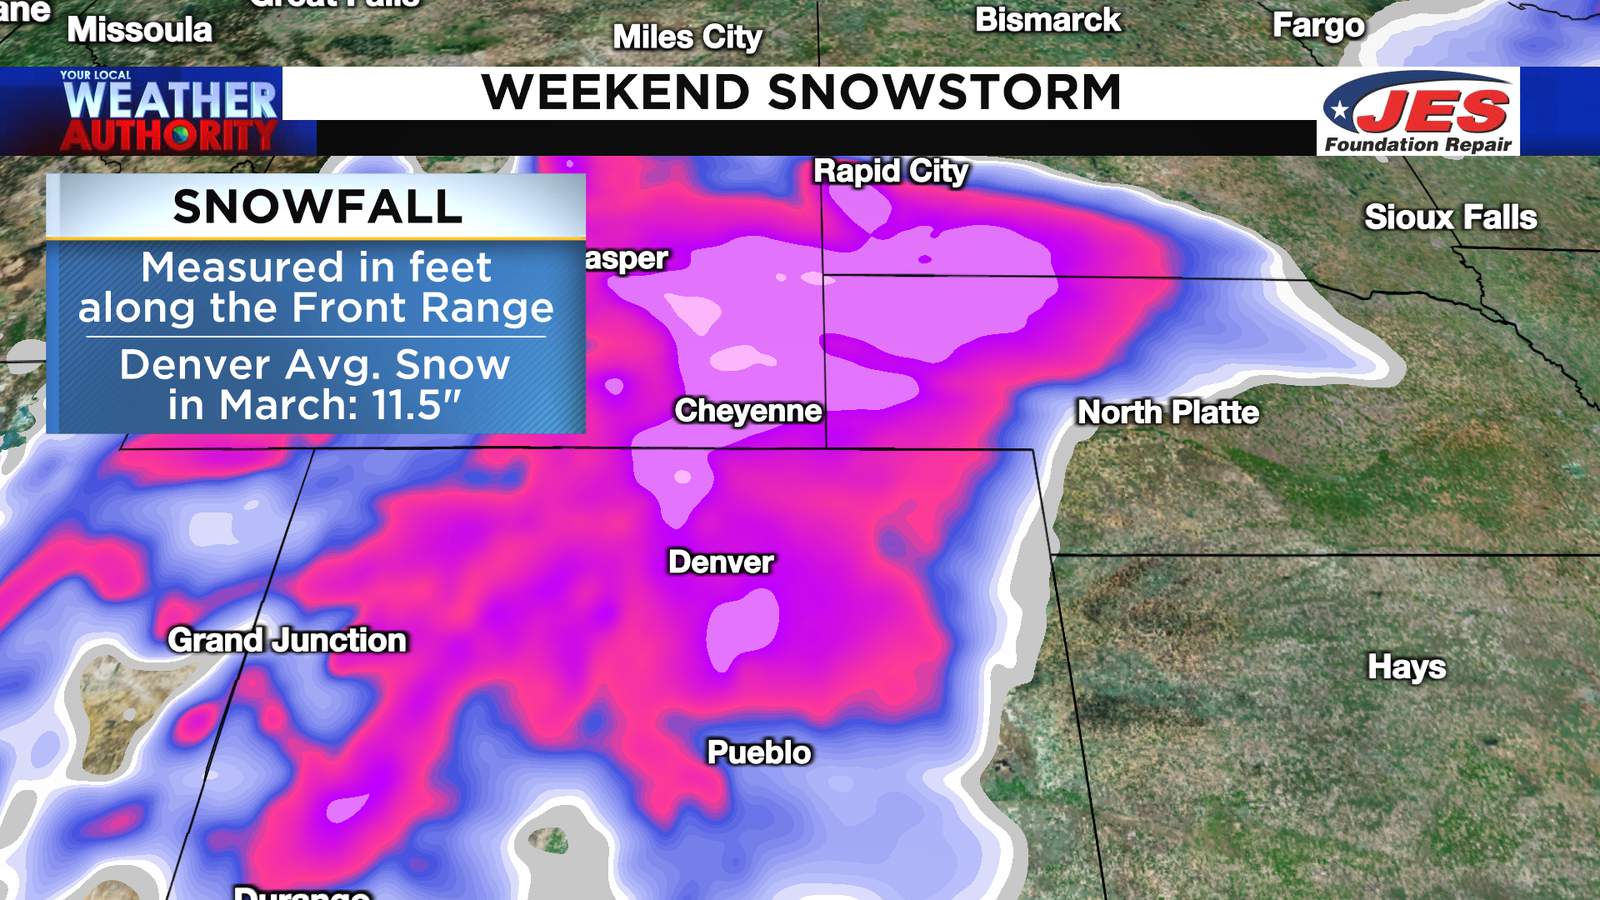 Parts of the Rockies could see feet of snow this weekend